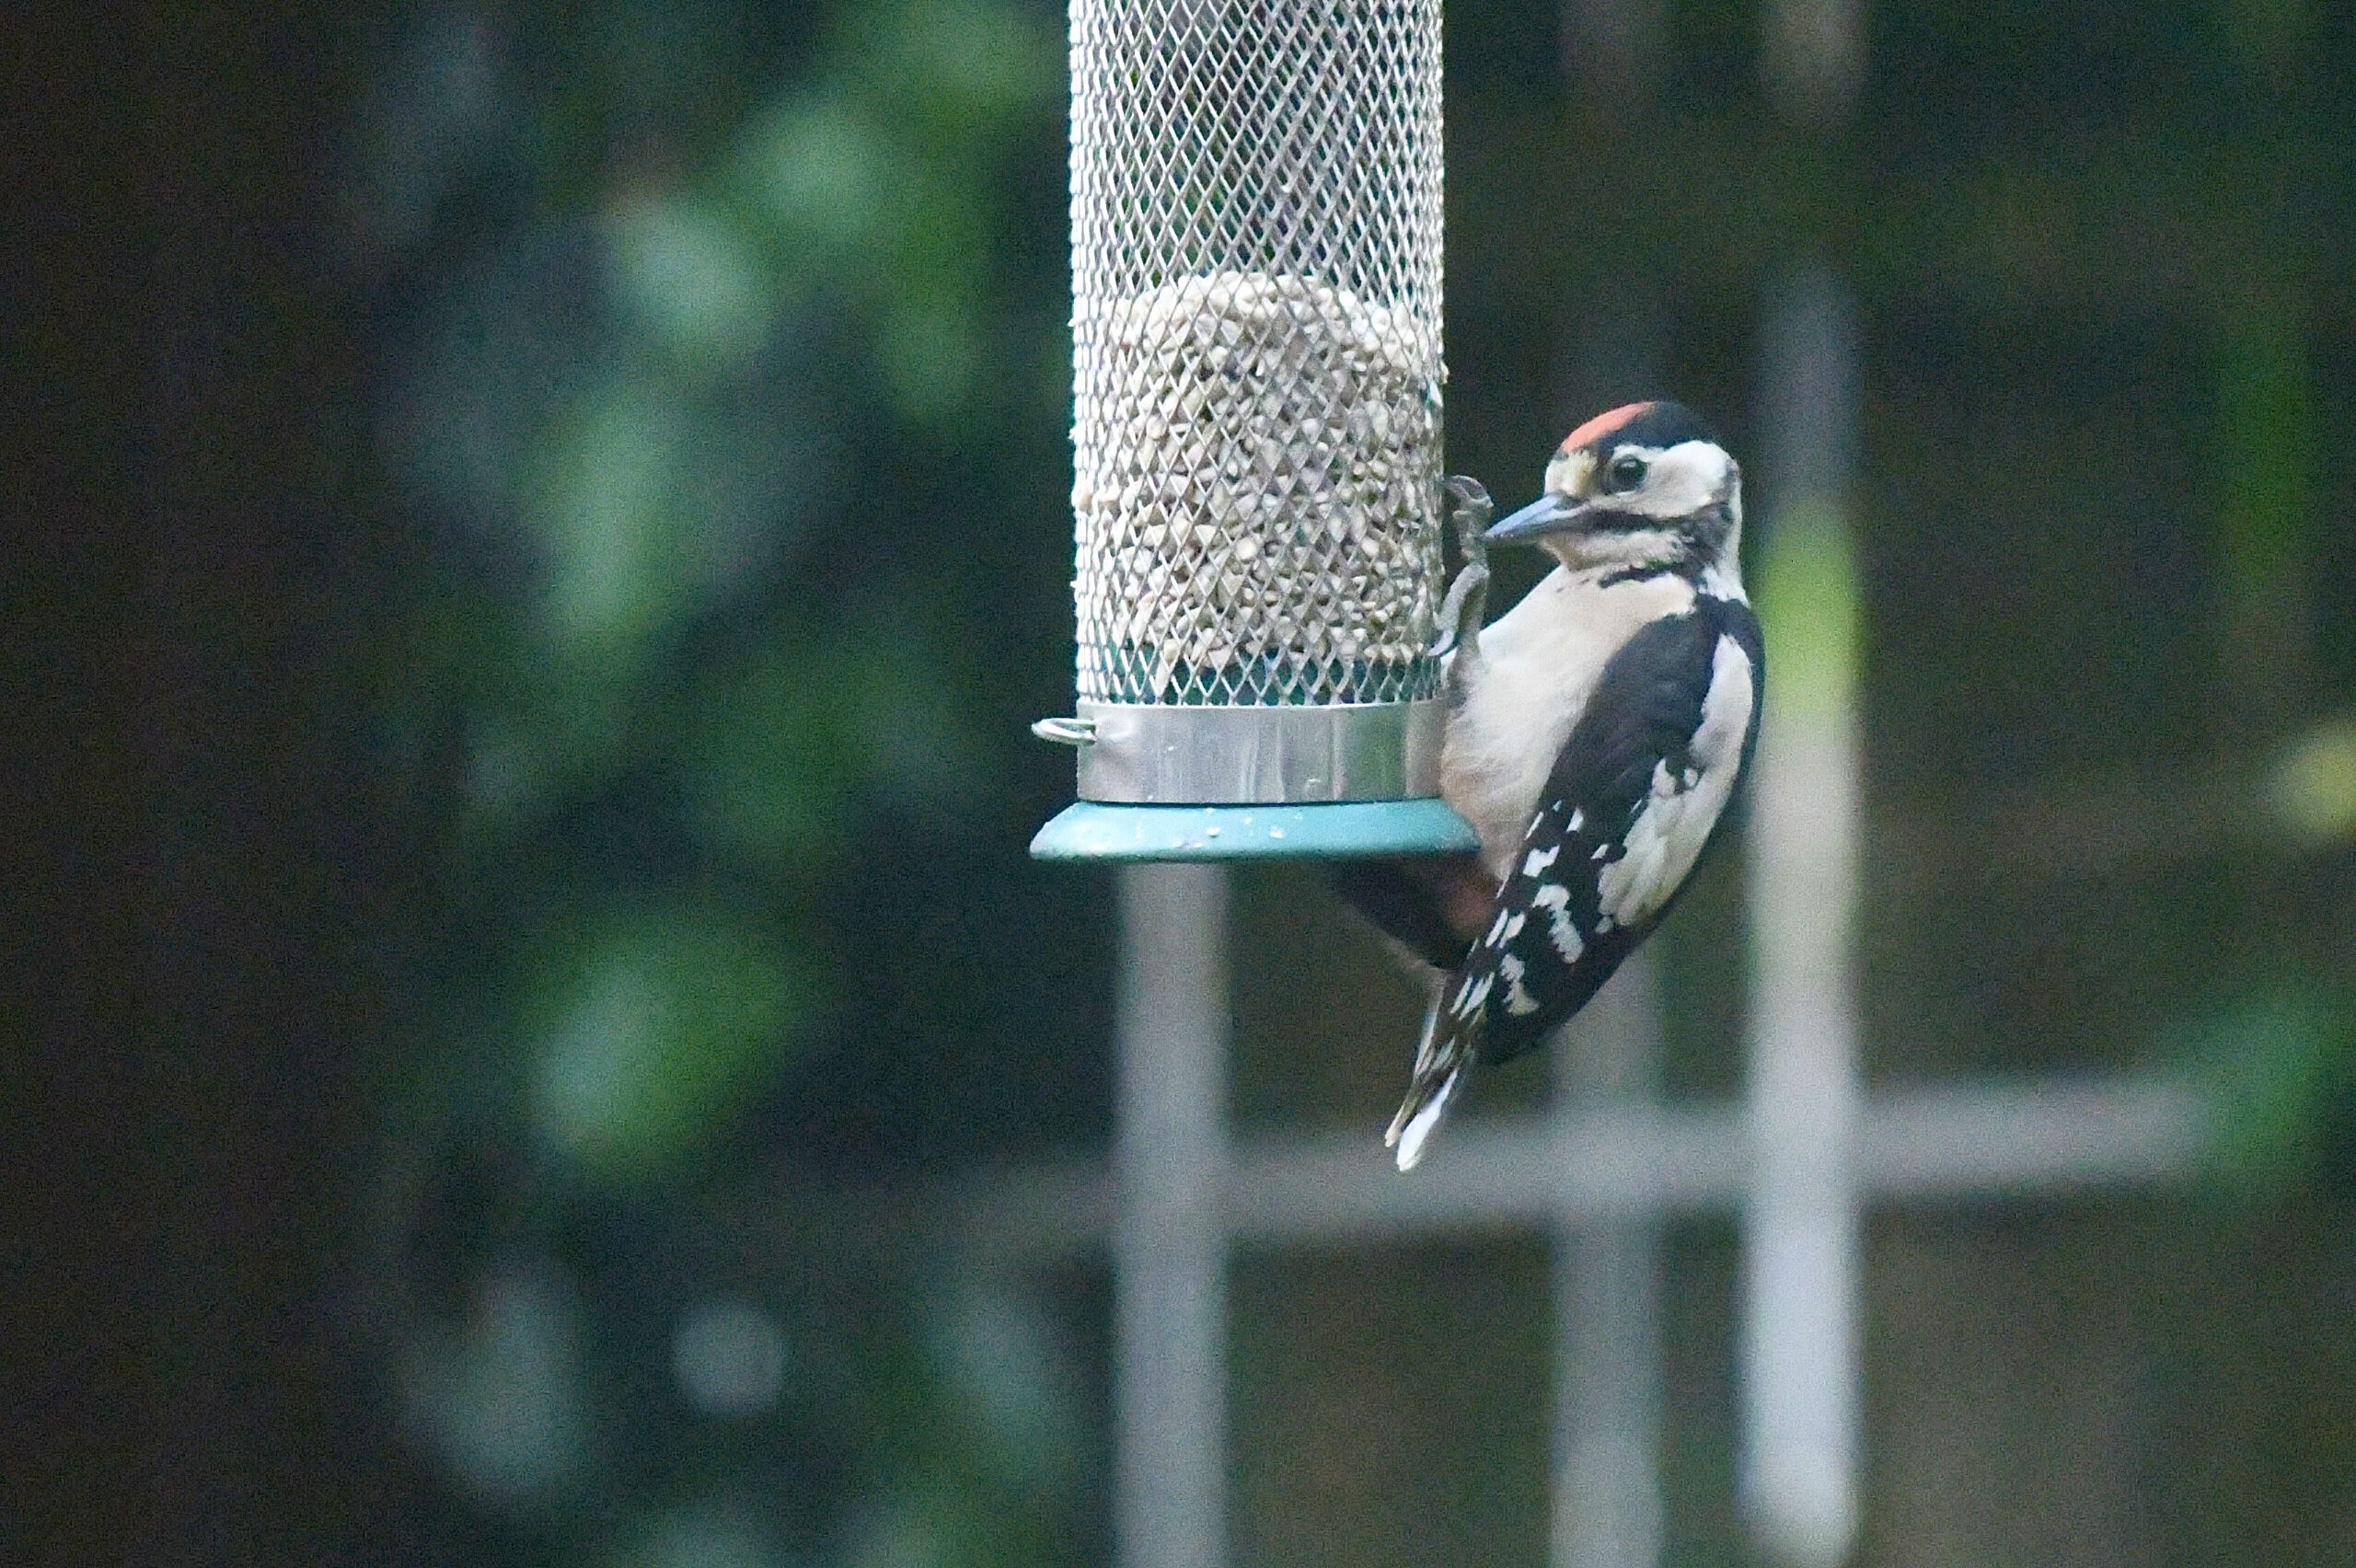 TO THE VICTOR THE SPOILS: The woodpecker feeds alone on sunflower hearts after it ripped the wing off a goldfinch